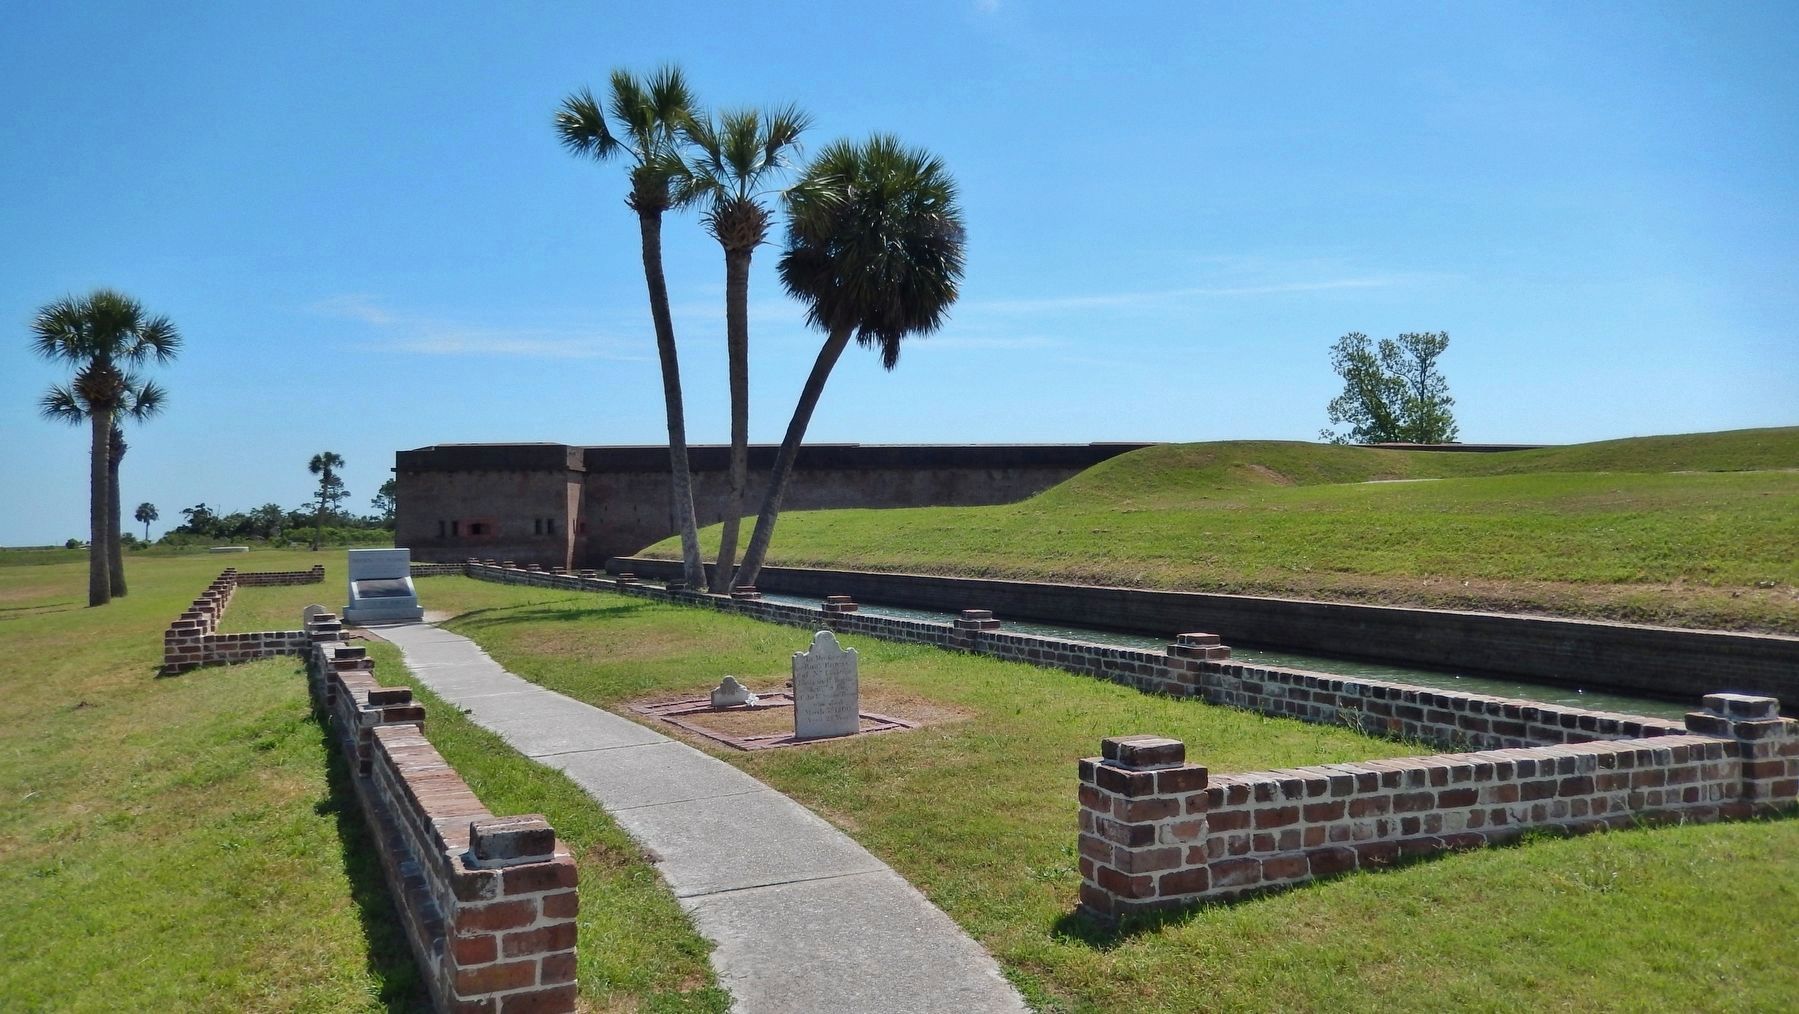 Fort Pulaski Cemetery (<i>view from near marker • Fort Pulaski in background</i>) image. Click for full size.